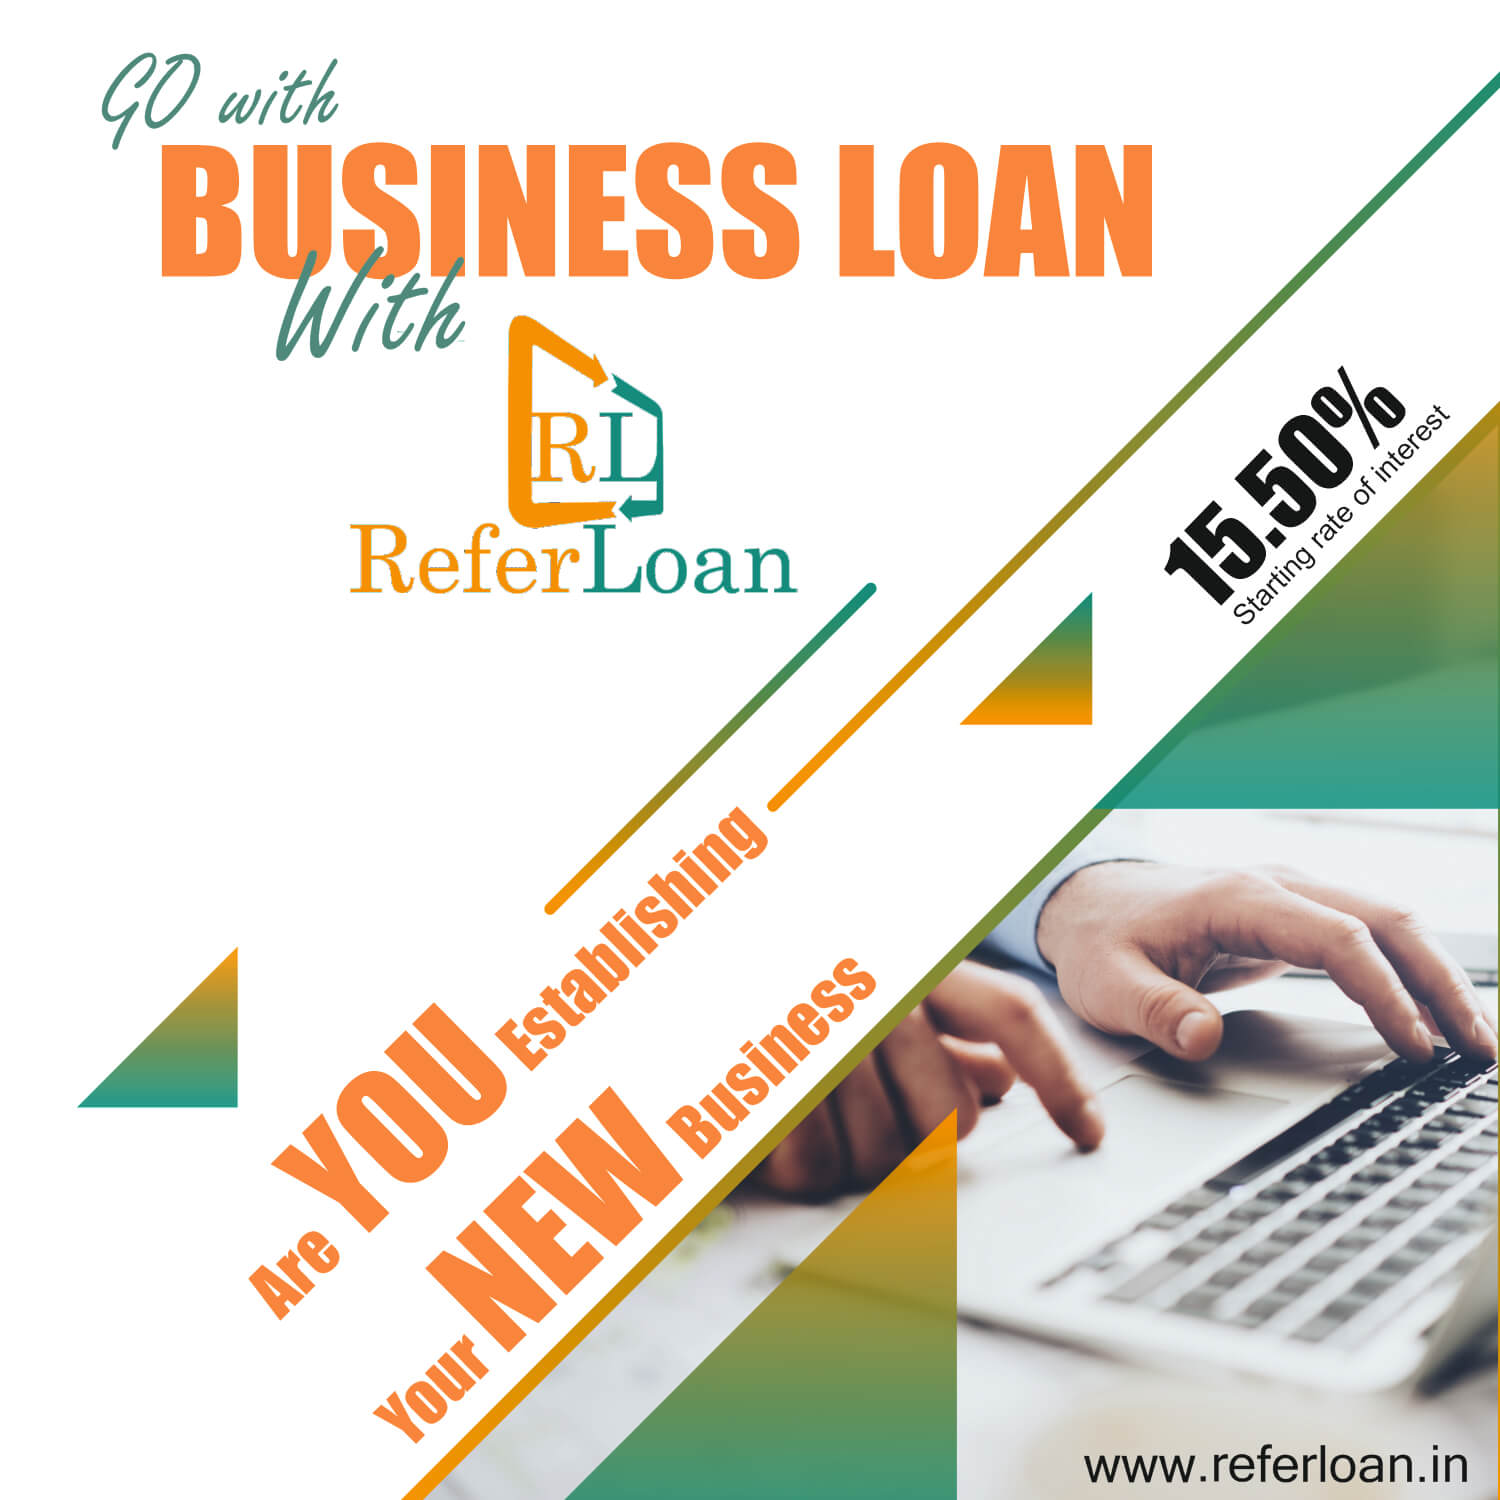 Make it grow with our business loan.